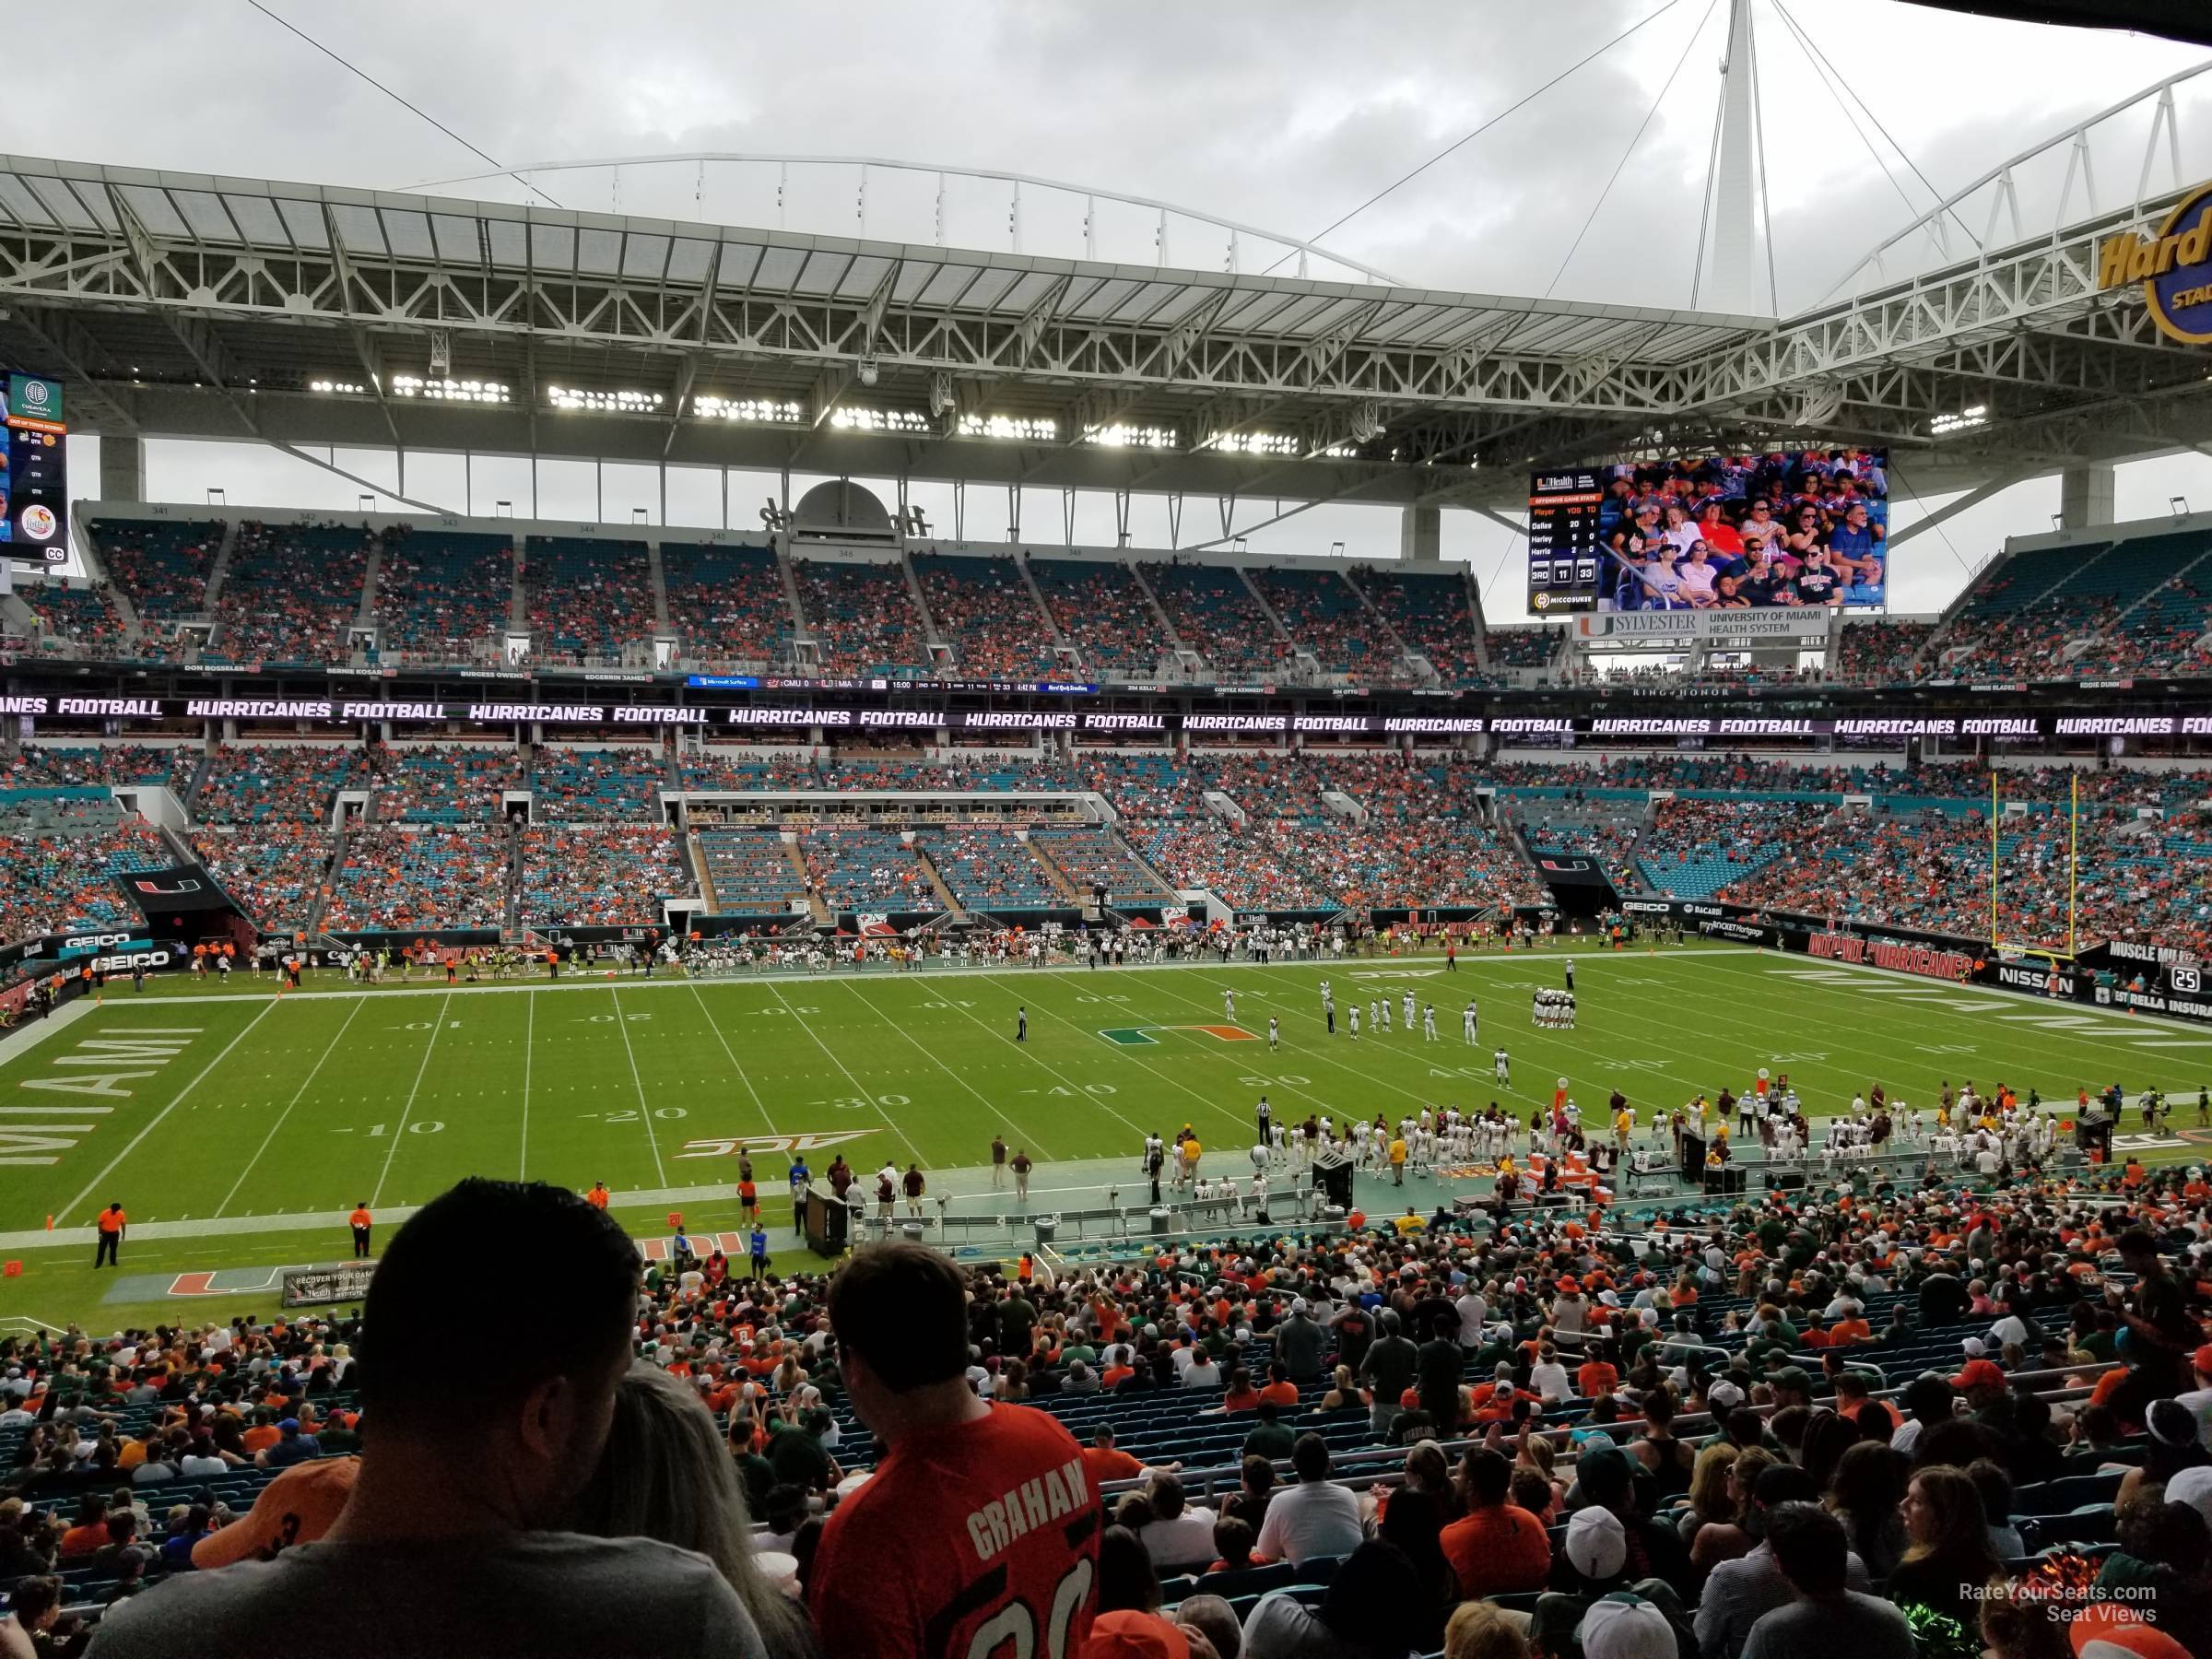 section 221, row 10 seat view  for football - hard rock stadium